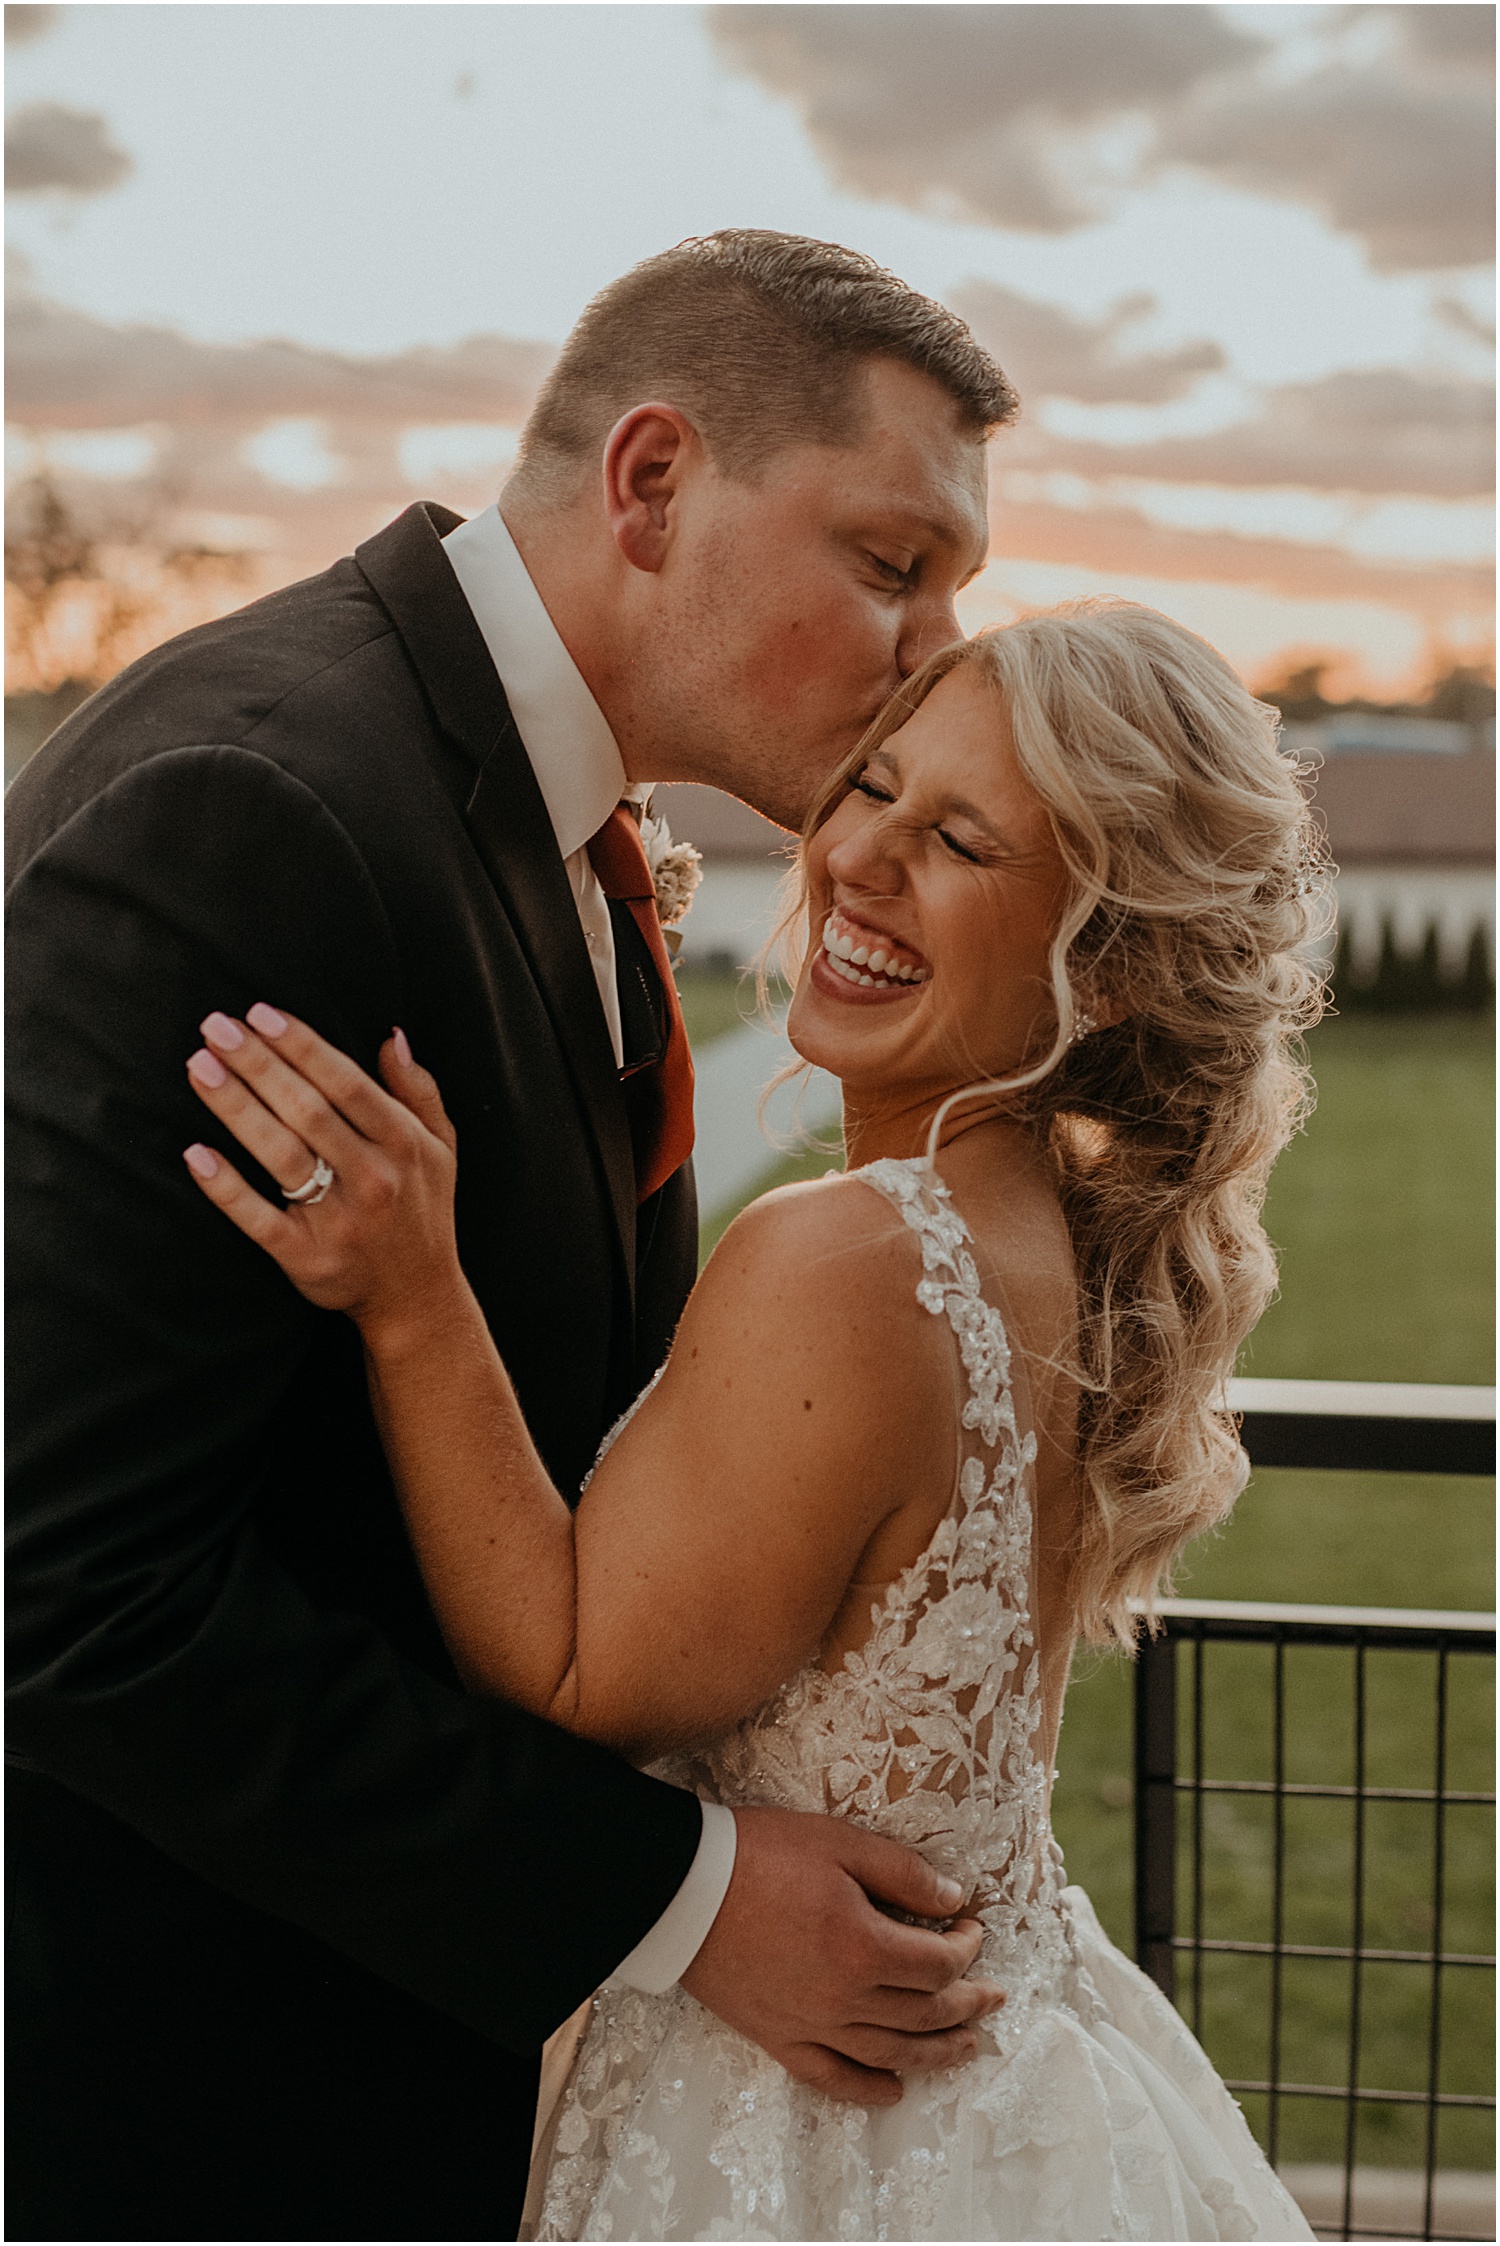 bride and groom portraits in michigan wedding venue during golden hour